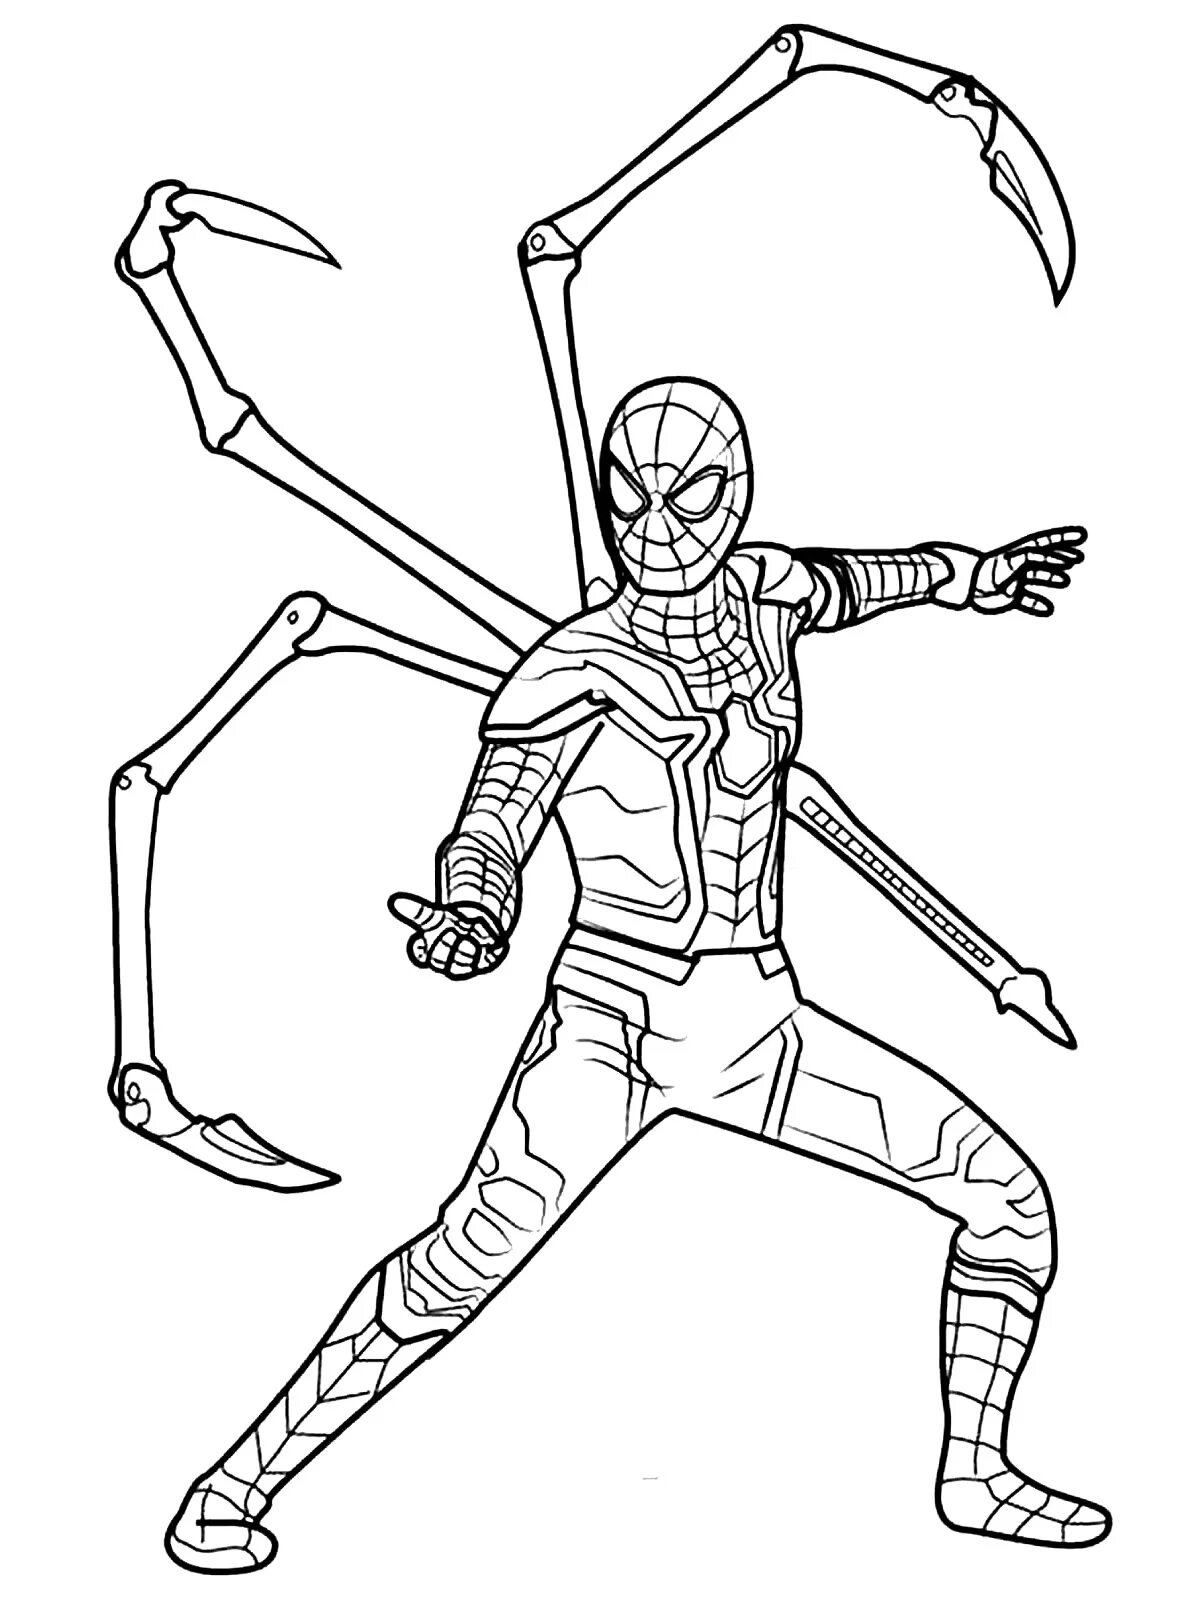 Spider-man with claws marvelous coloring book